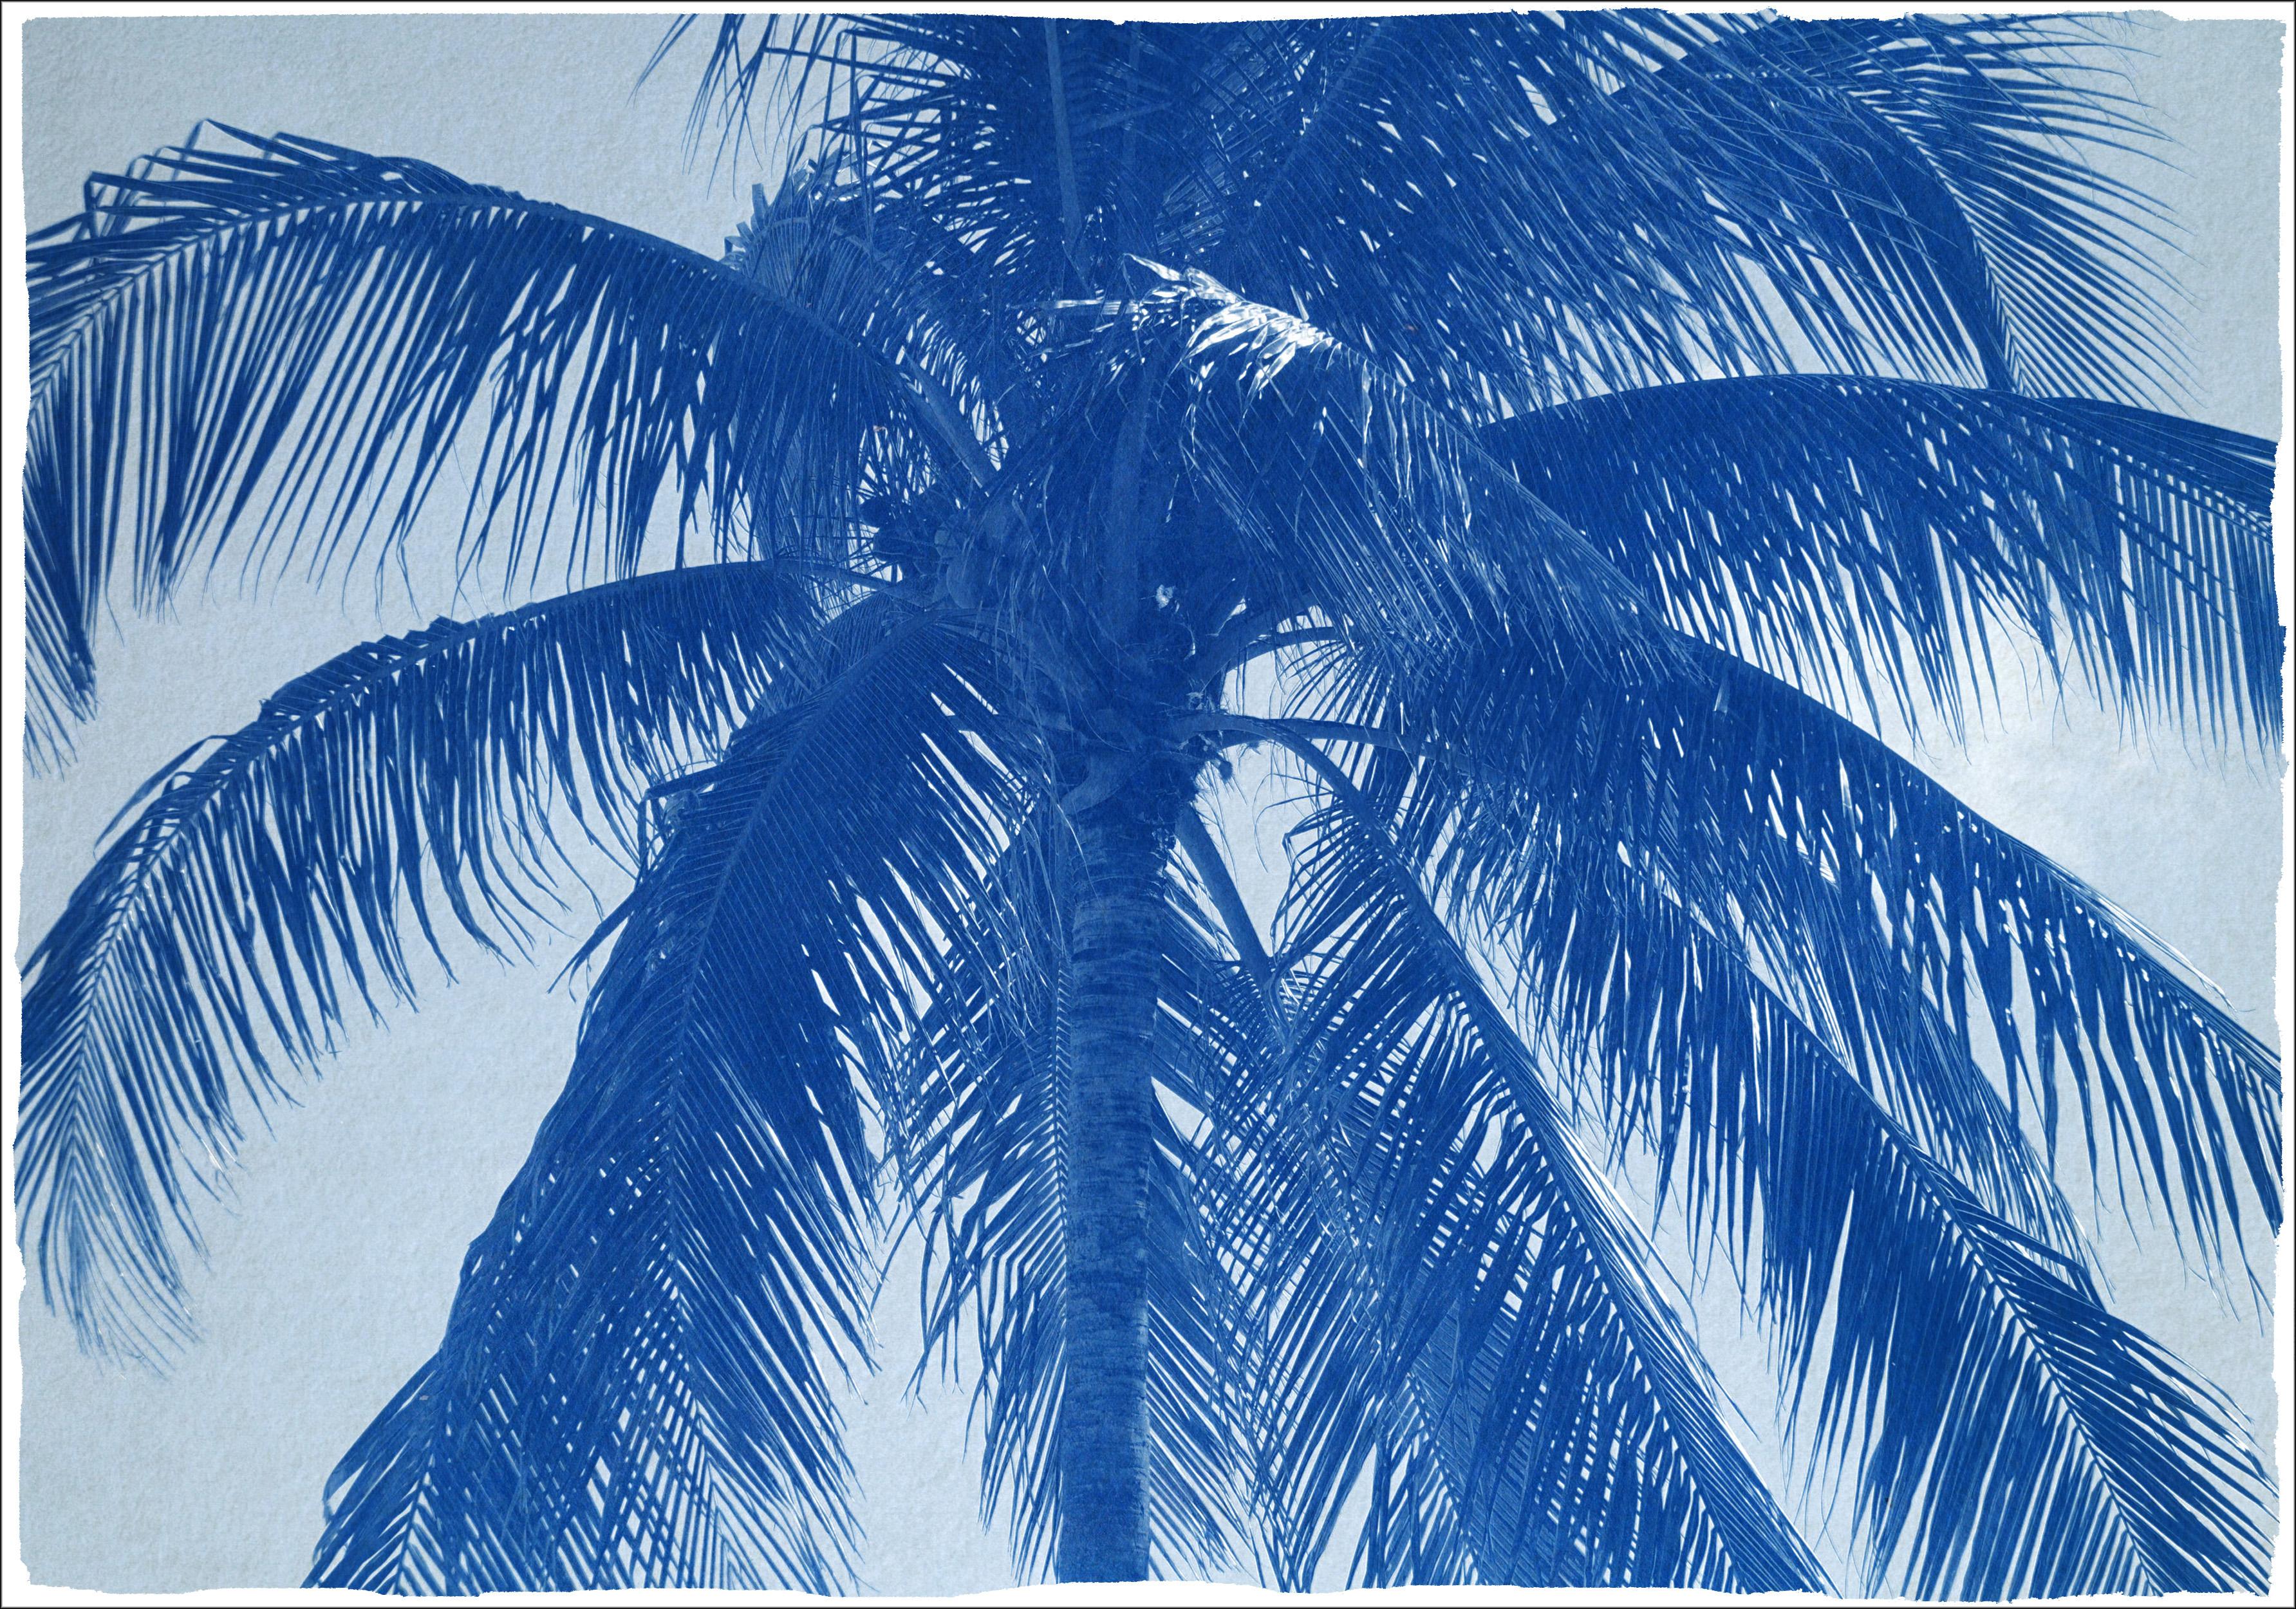 Kind of Cyan Still-Life Photograph - Coconut Palm Tree, Large Botanical Print, Tropical Style in Blue Tones, Limited